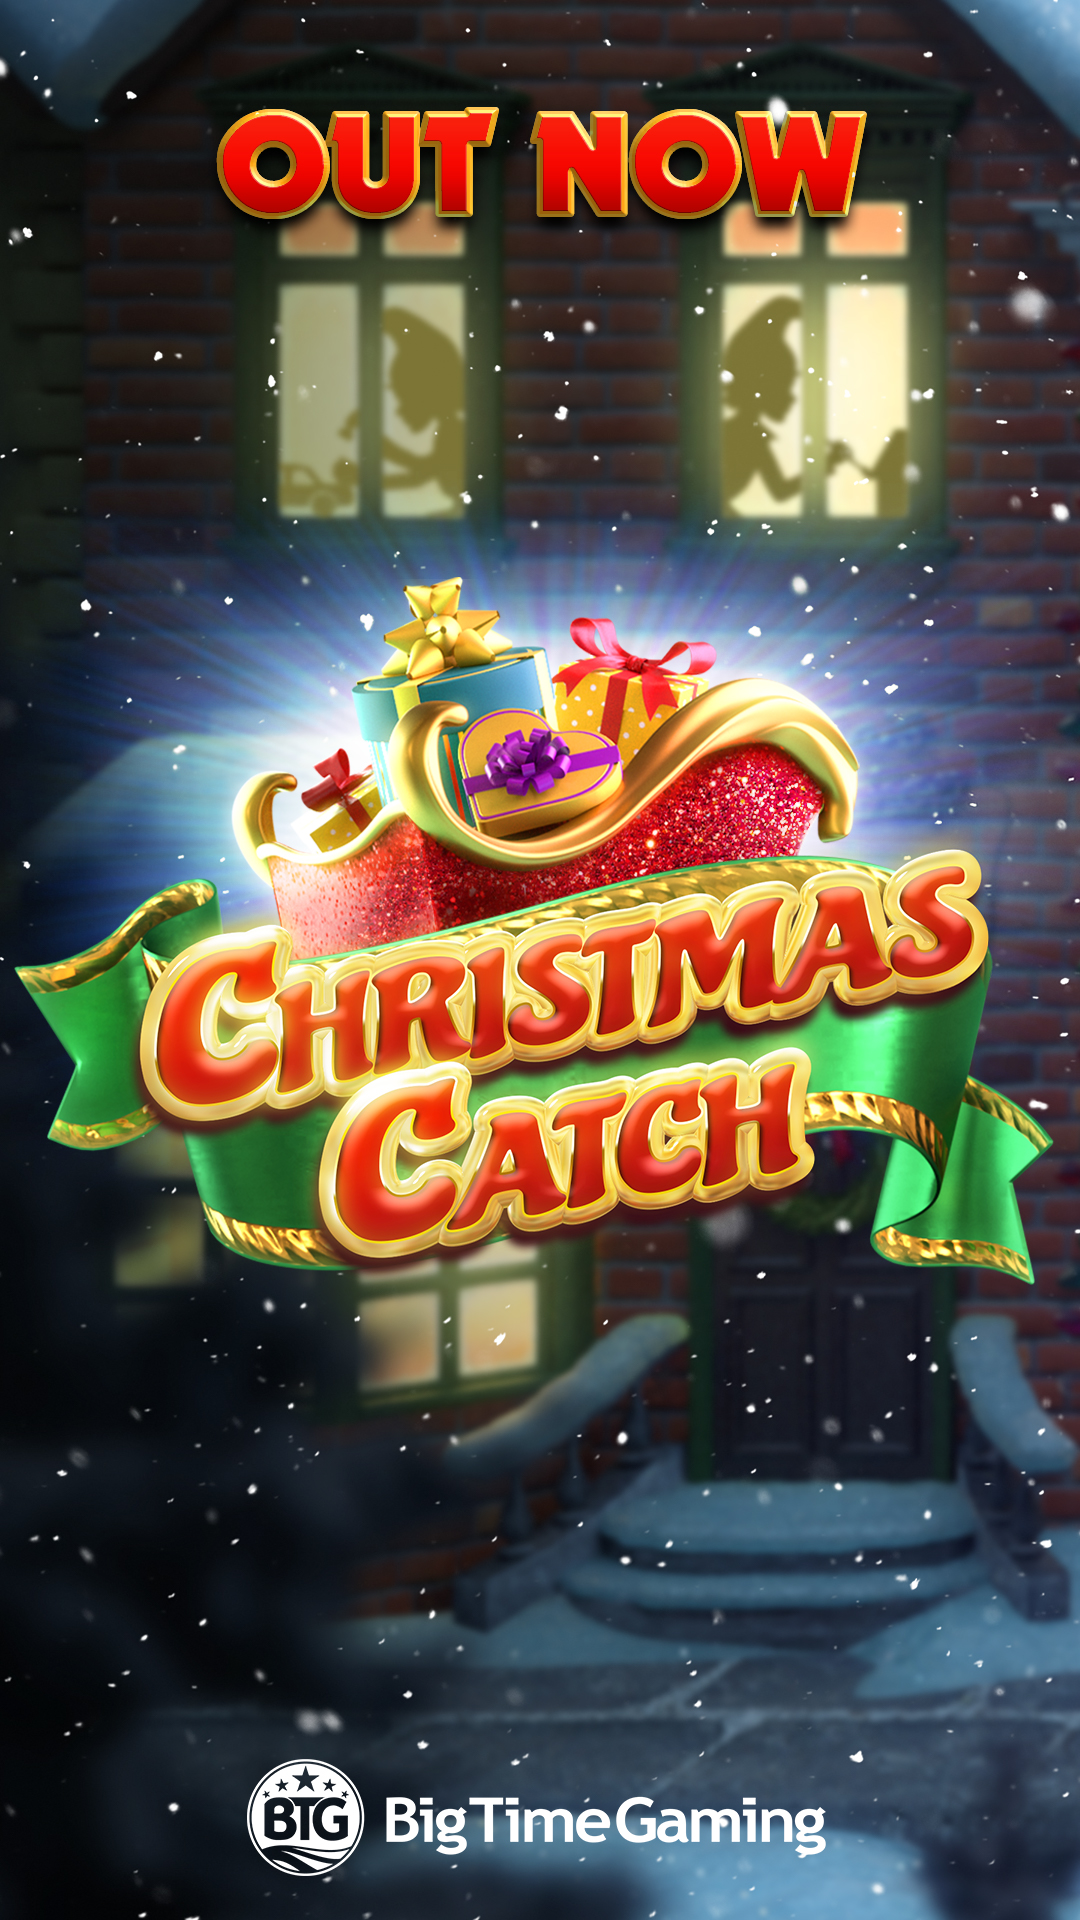 christmas_catch_instagram_story_out_now_1080x1920.jpg thumbnail